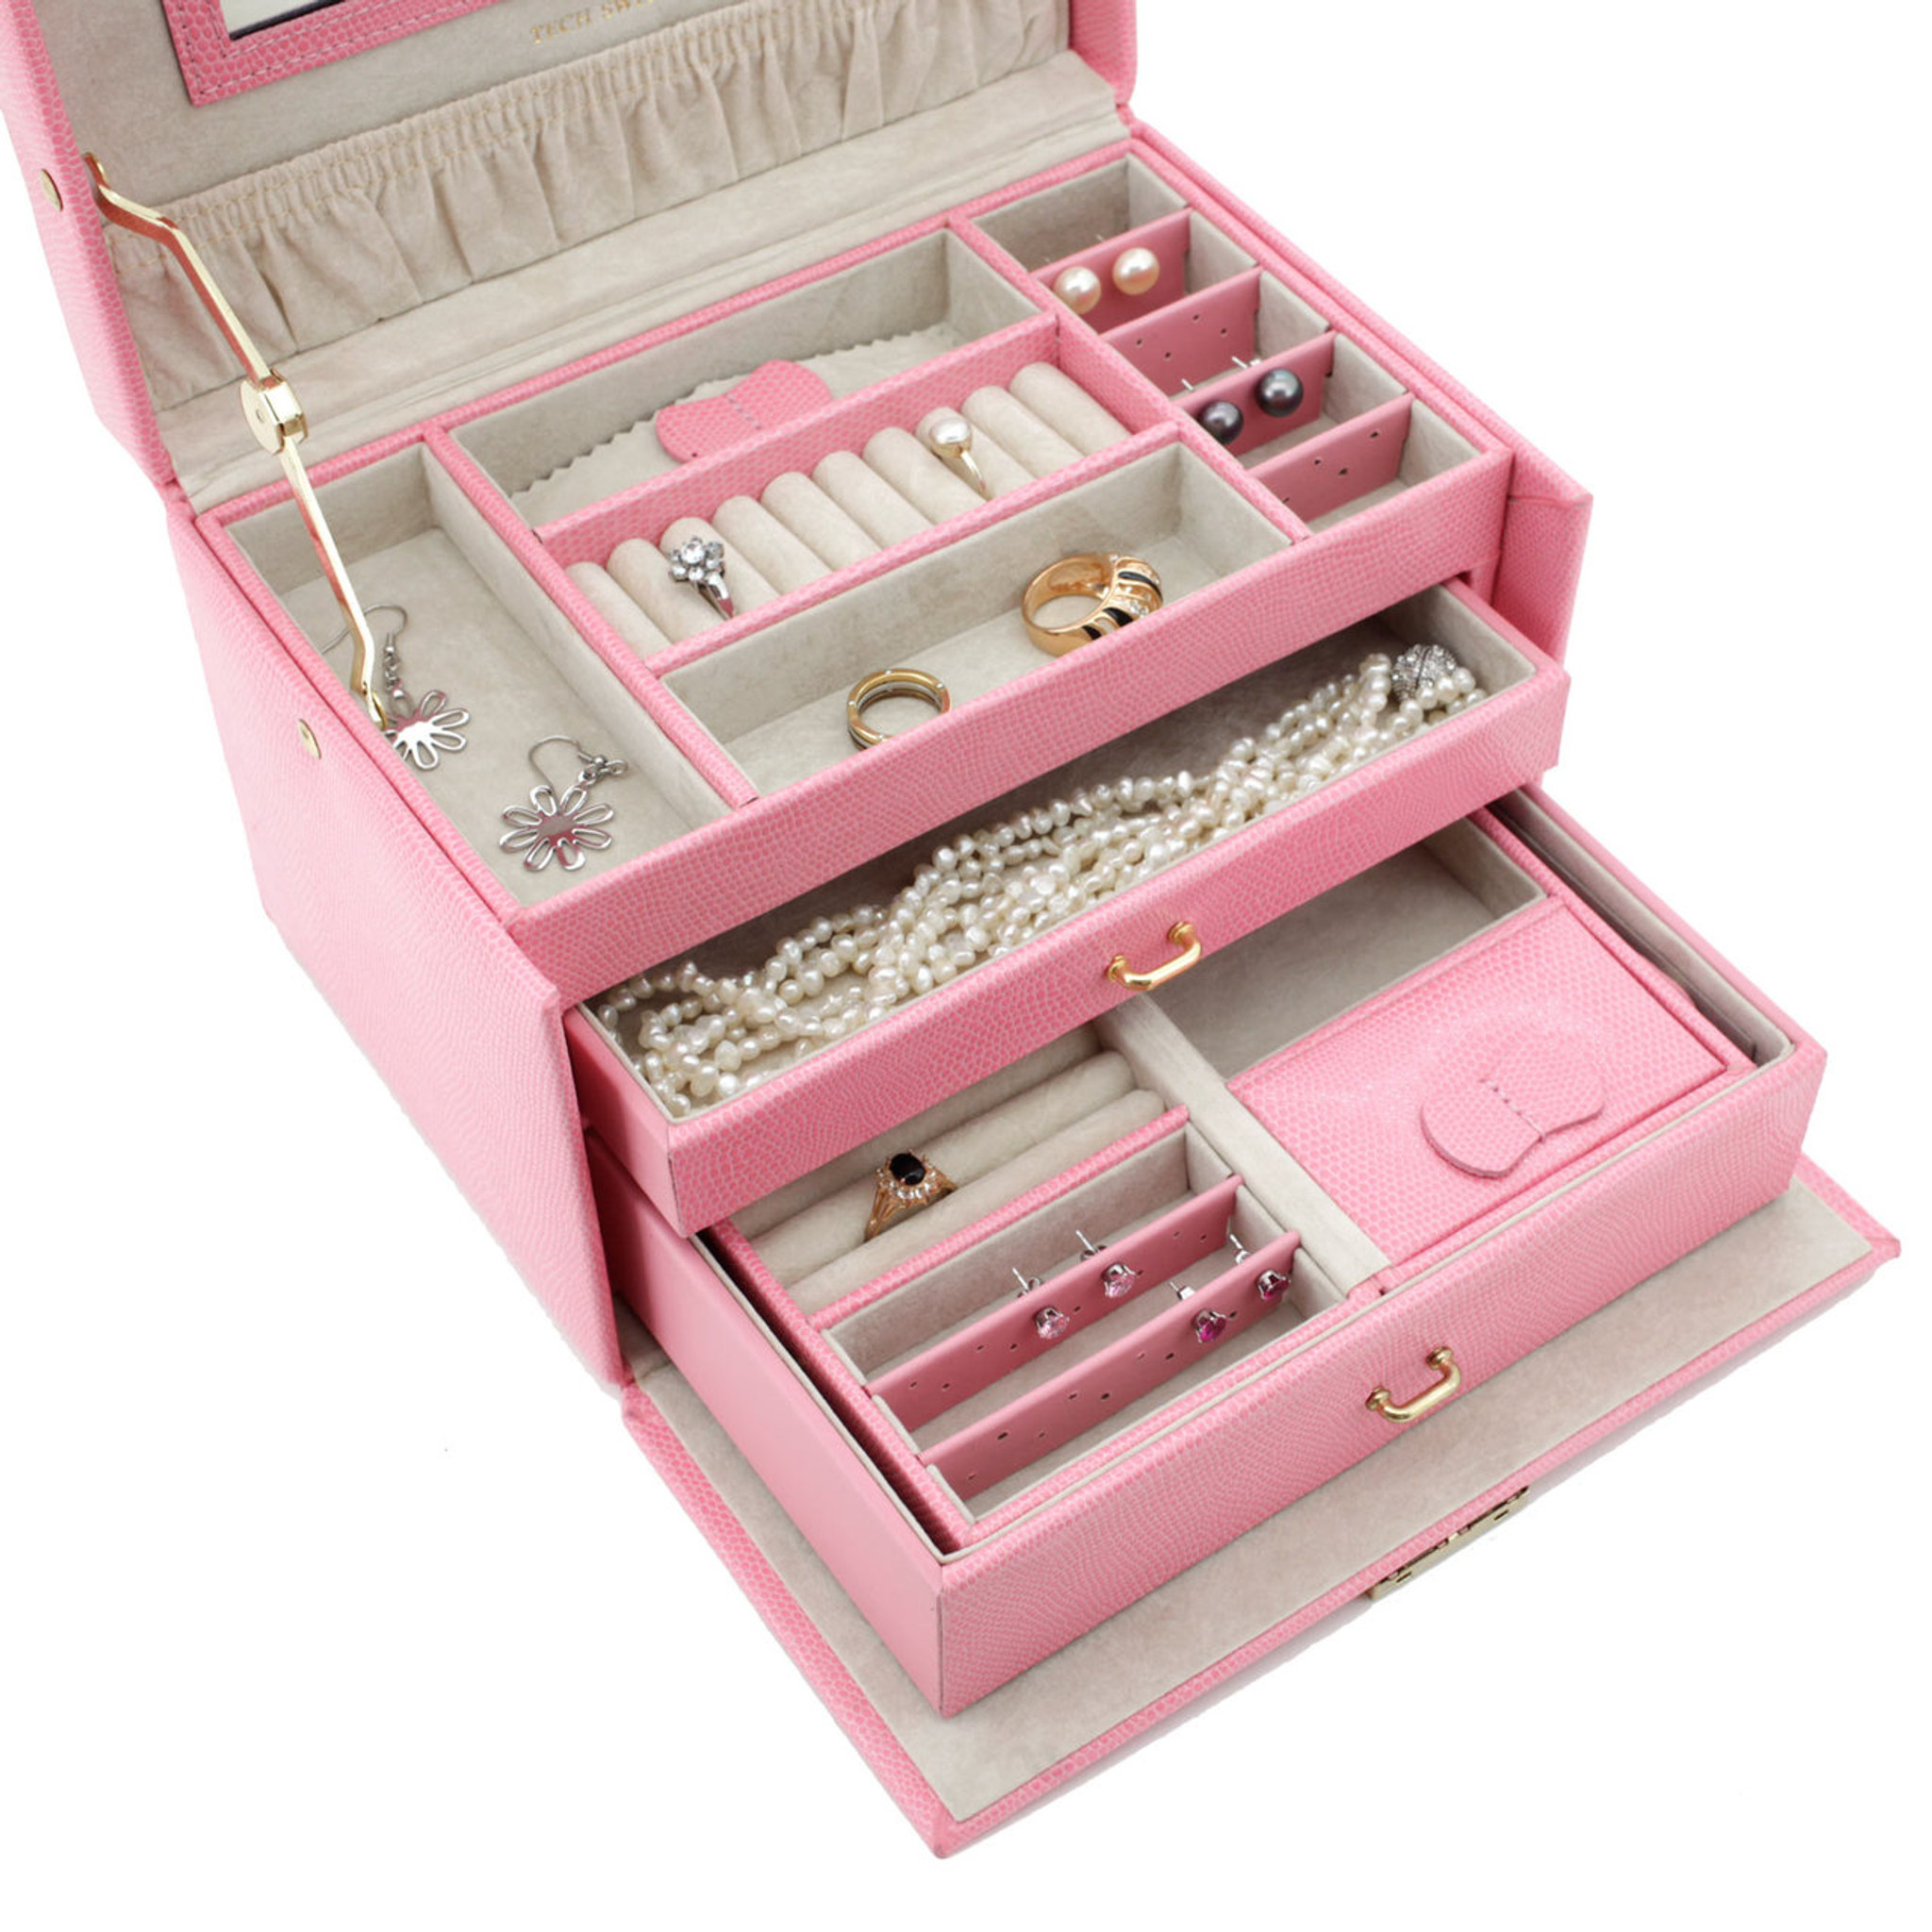 Portable Pink Jewelry Box Organizer Lady Girls Jewelry Box Organizer Mini  Travel Jewelry Storage Case For Necklace Earrings Rings From  Paulelectronic, $5.2